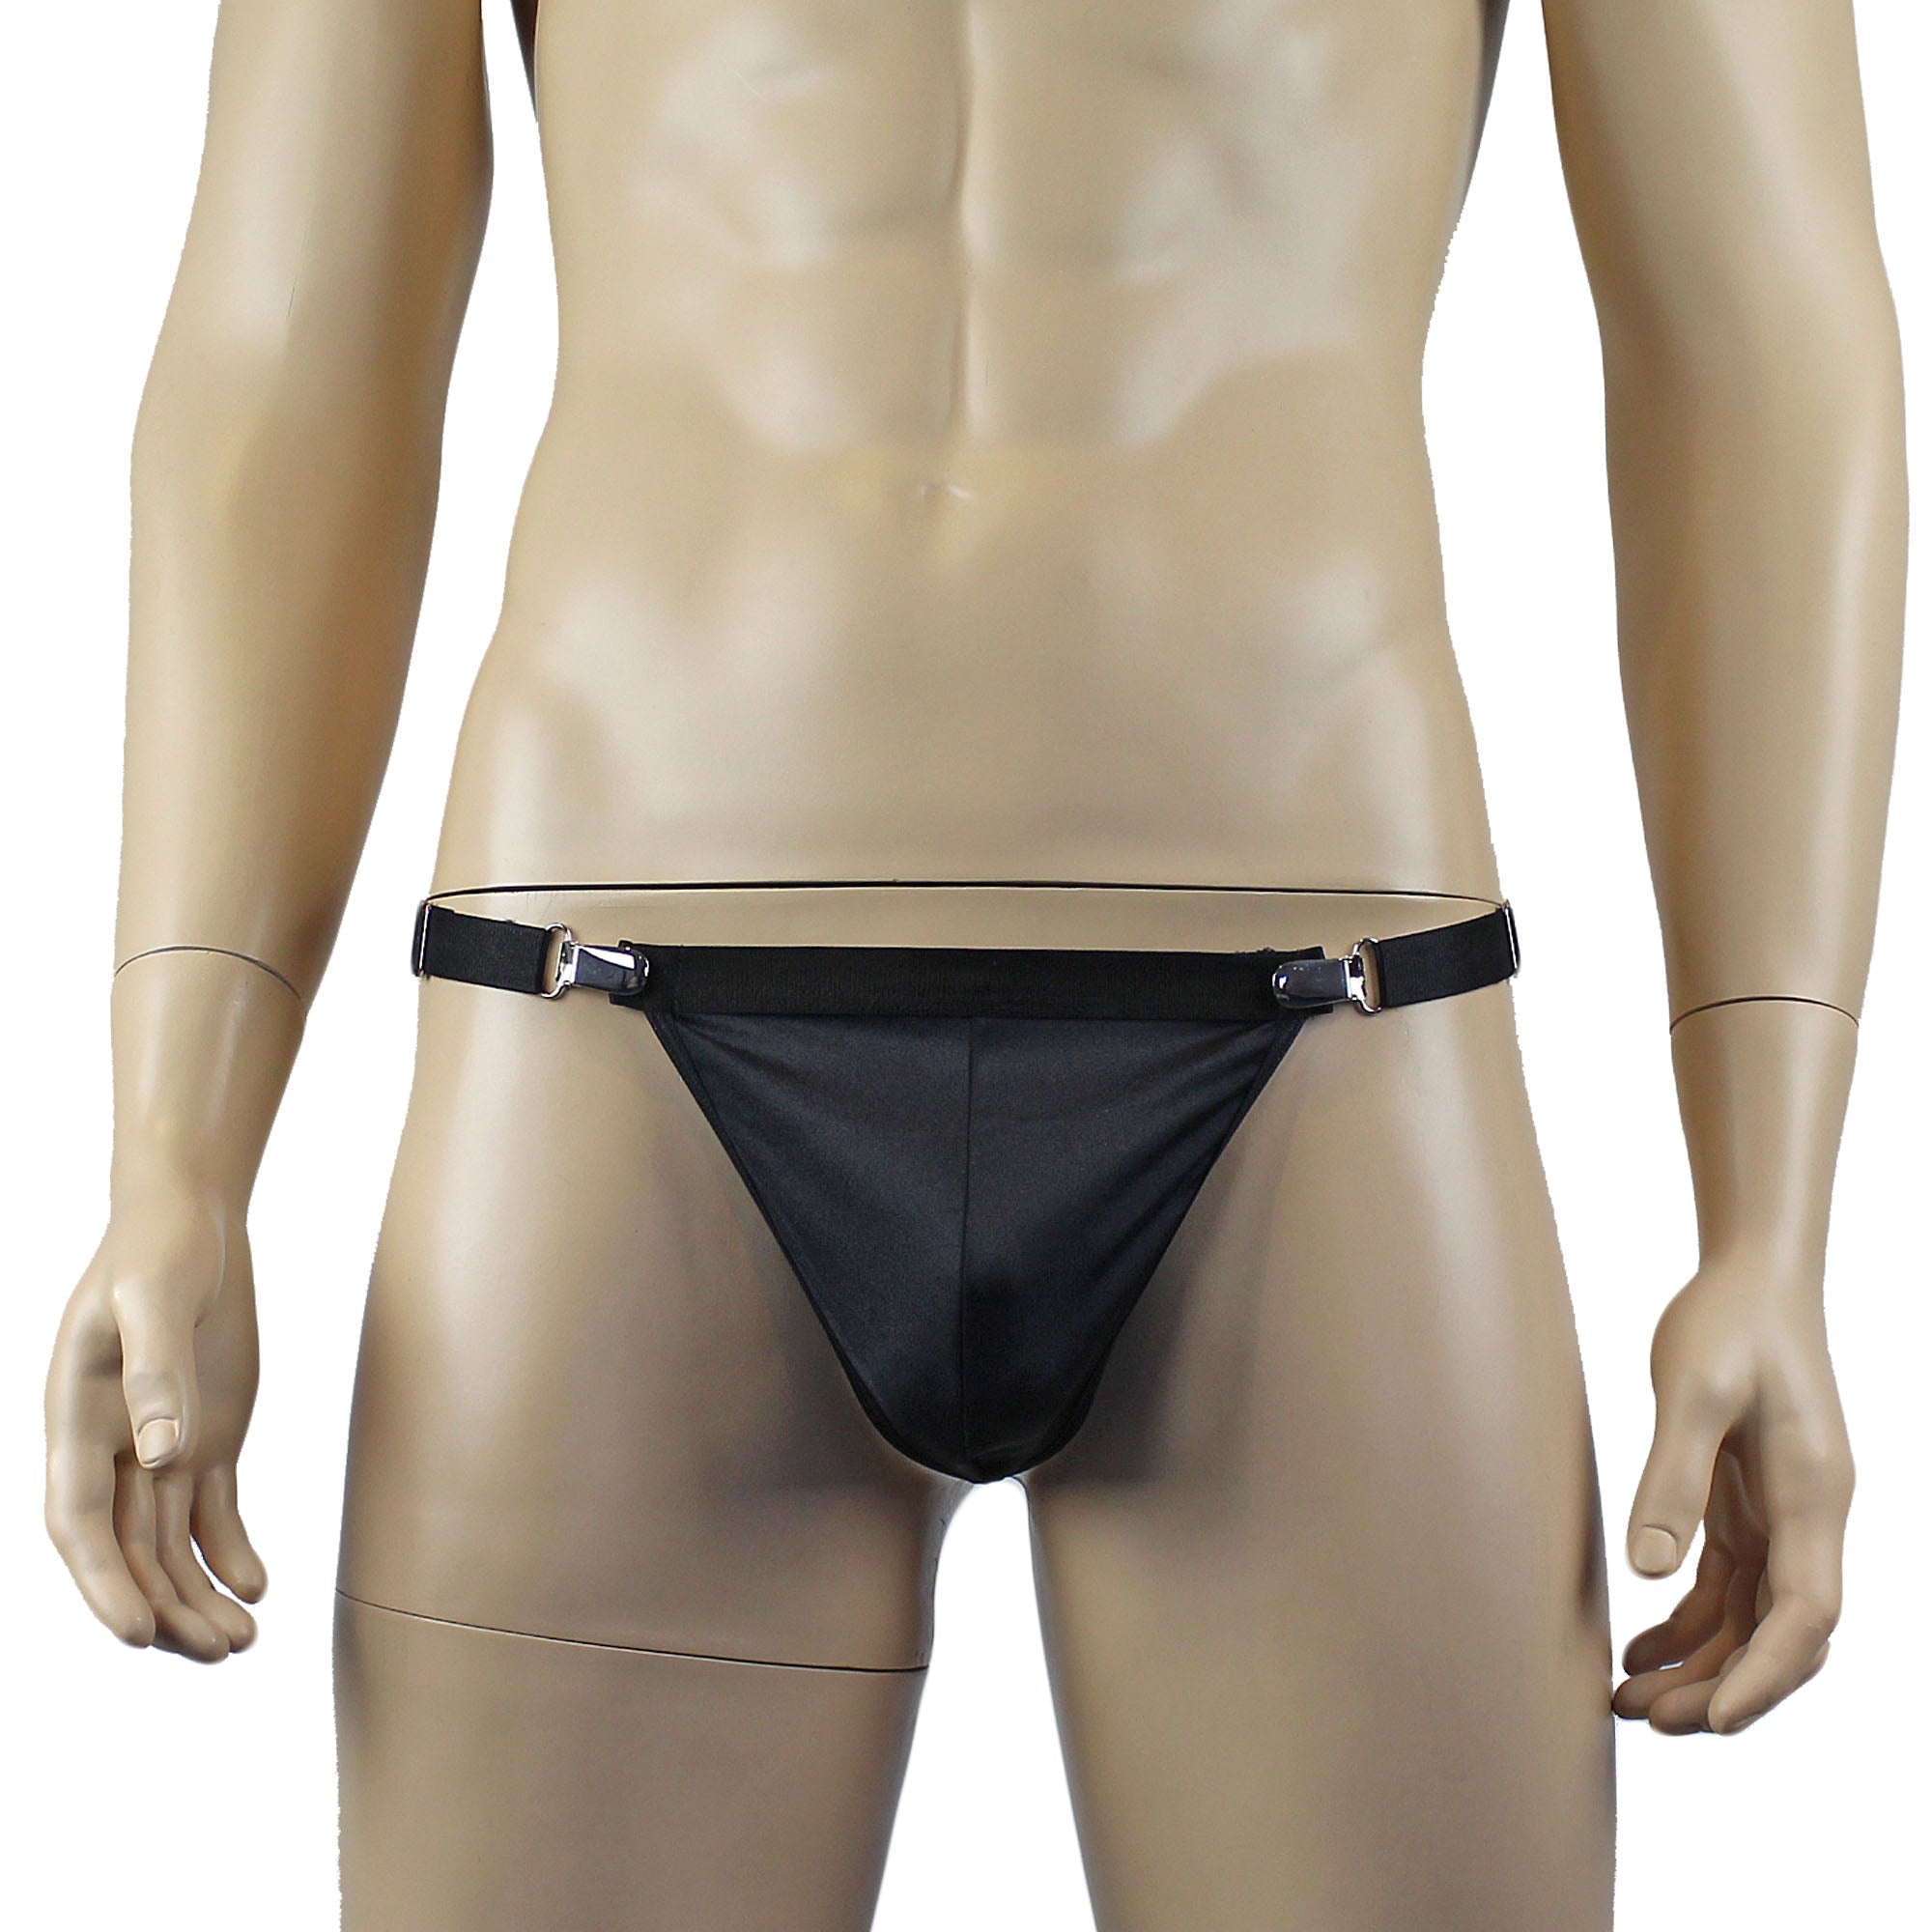 Mens Janice Thong with Adjustable Silver Clip Sides, Detachable Garters & Leg Bands Black